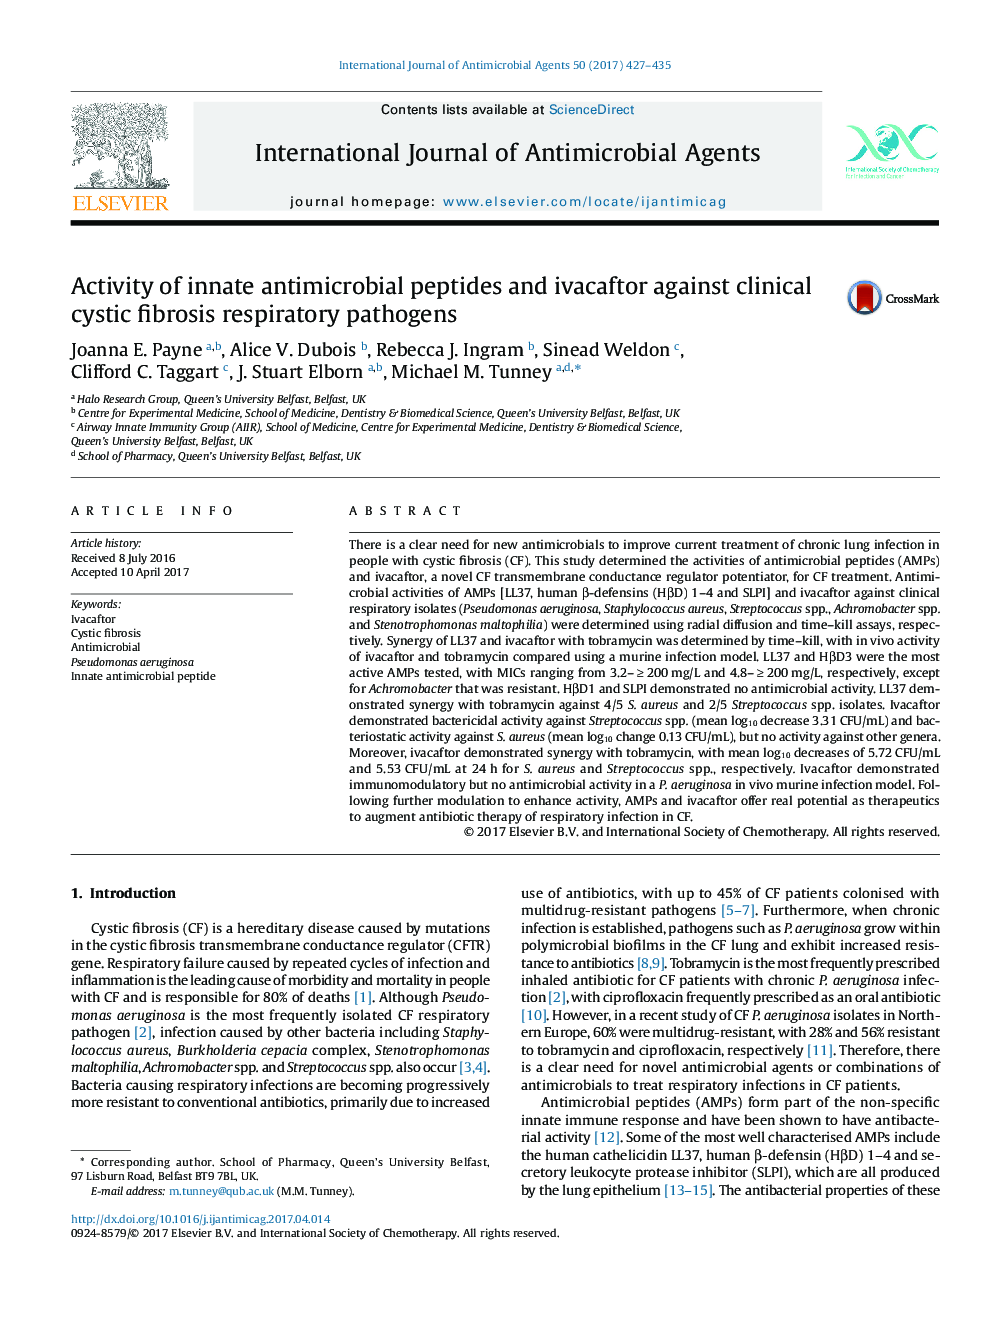 Activity of innate antimicrobial peptides and ivacaftor against clinical cystic fibrosis respiratory pathogens